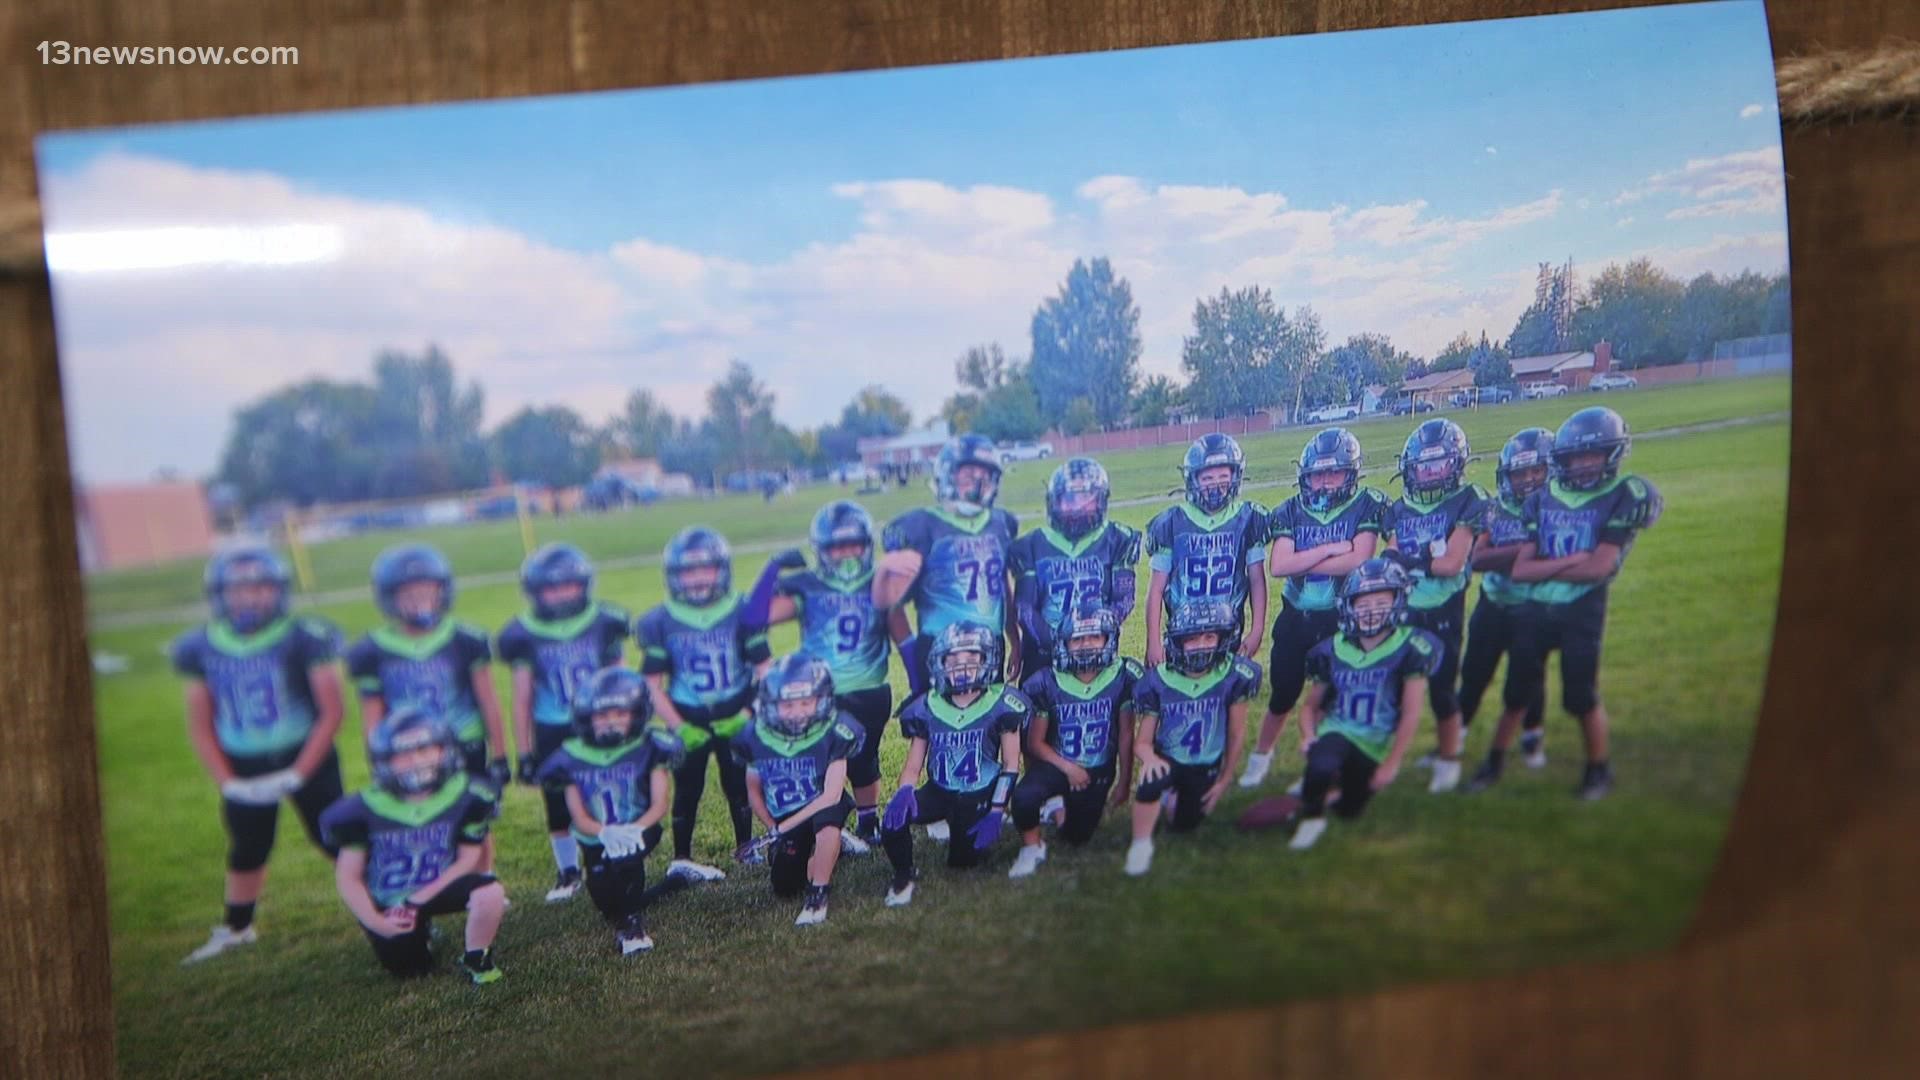 Colorado youth football coach Chris Garcia ordered new team jerseys in July. He only just got them, thanks to the help of a nearby Suffolk worker.